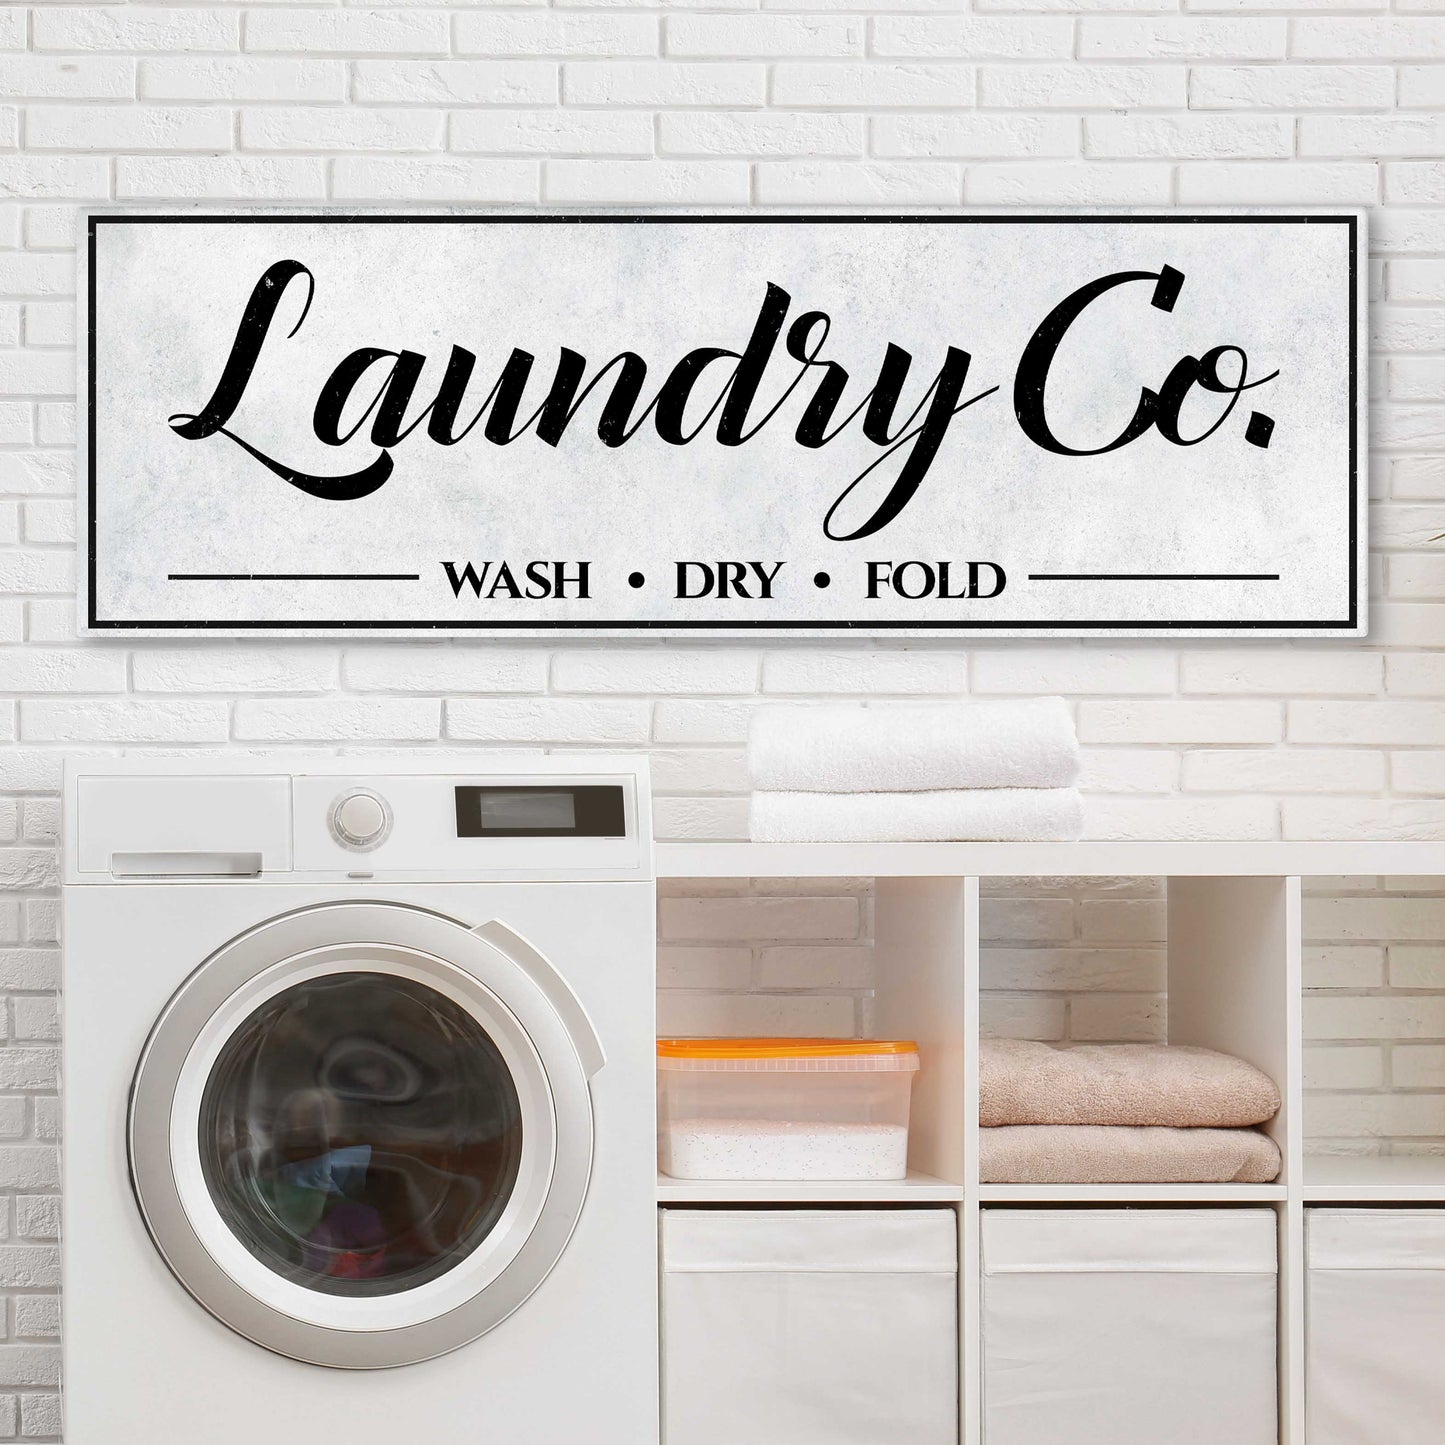 Laundry Co Wash Dry Fold Sign - Image by Tailored Canvases